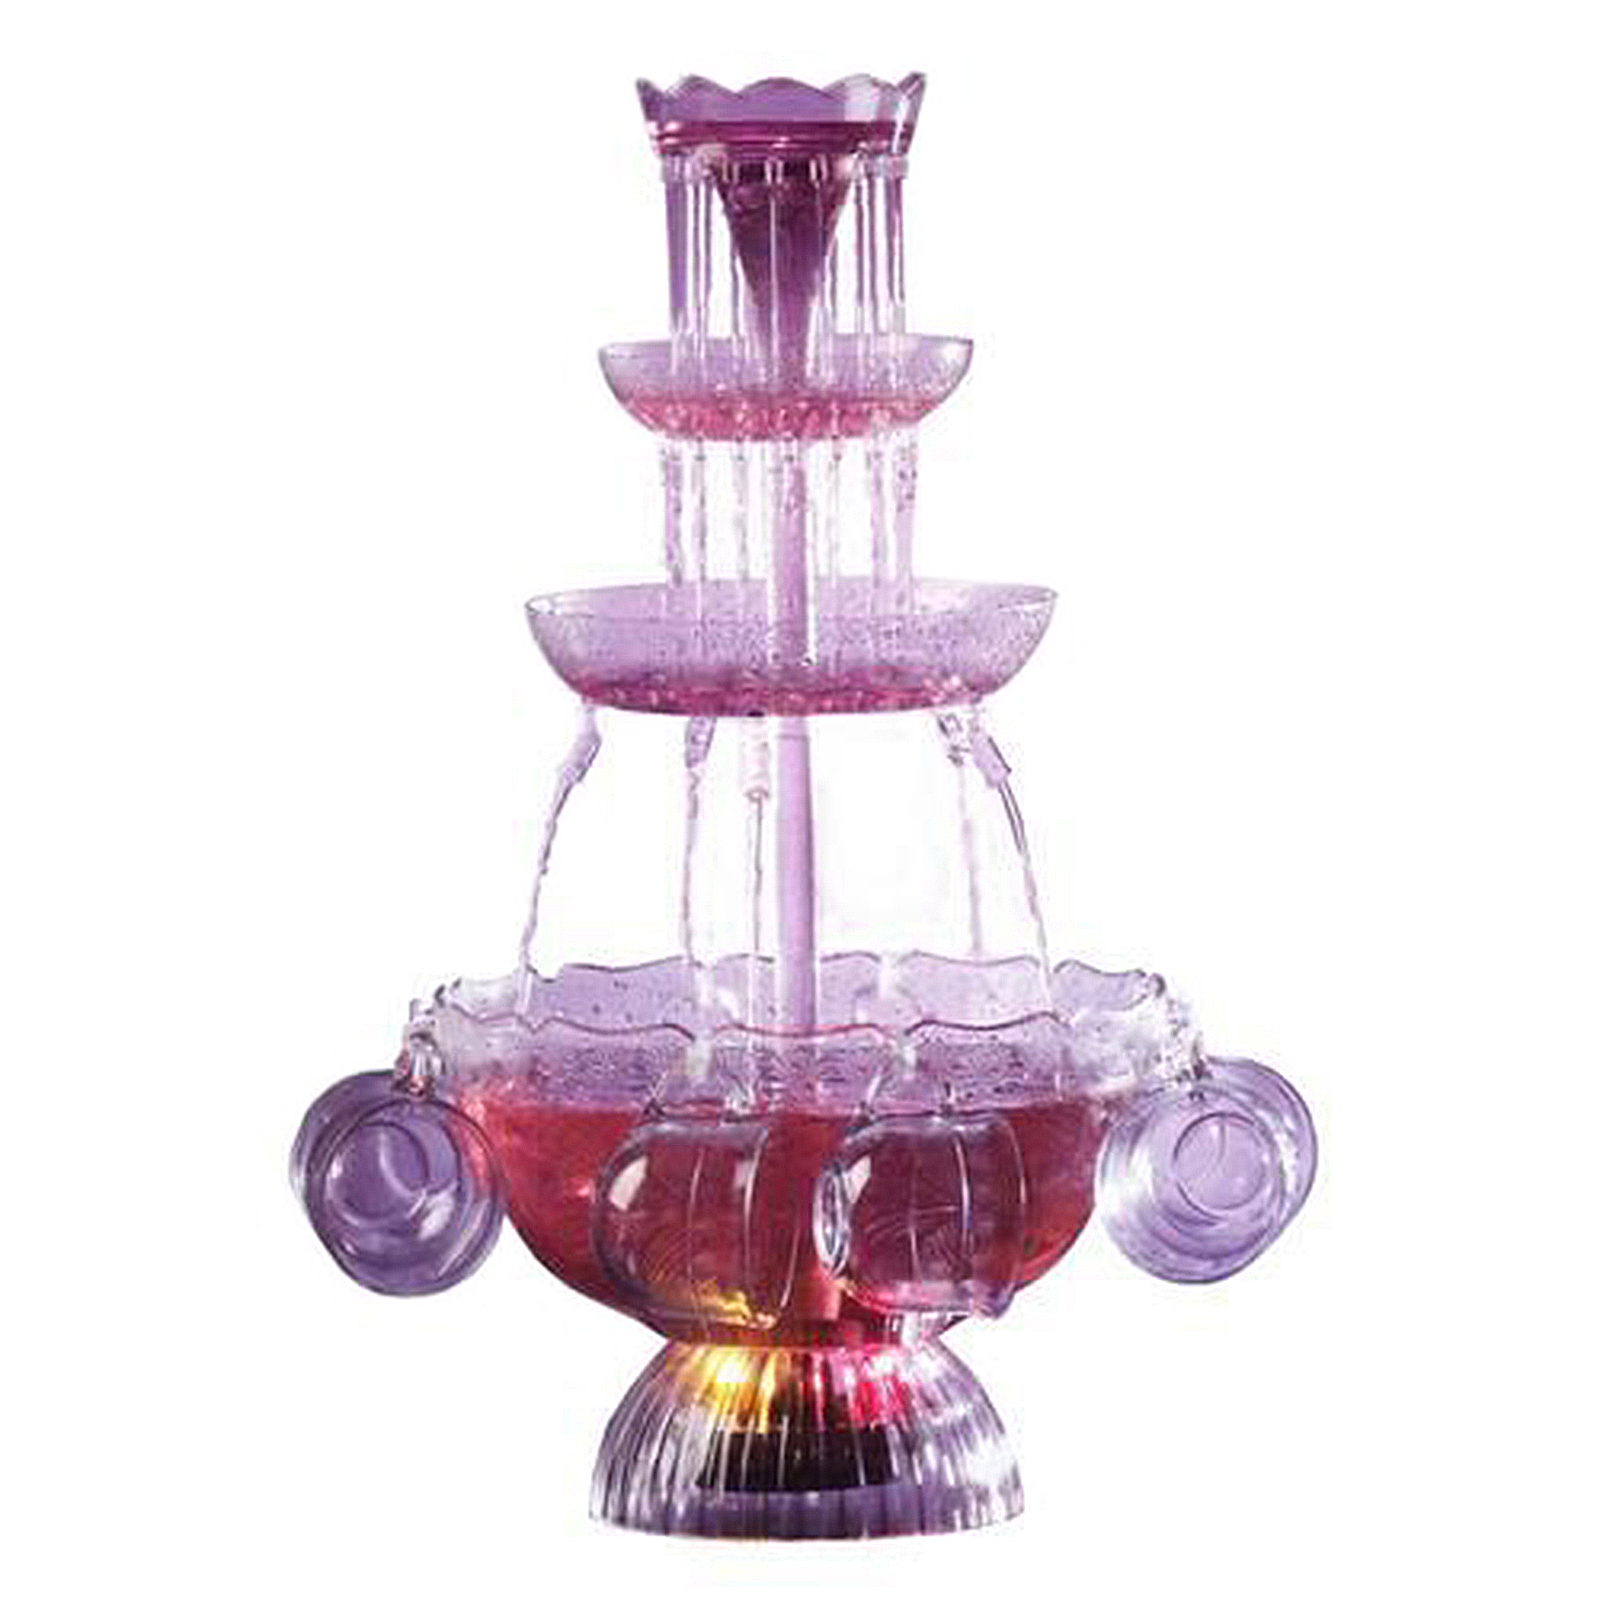 Nostalgia Electrics LPF210 Vintage Collection Lighted Party Fountain Beverage Set